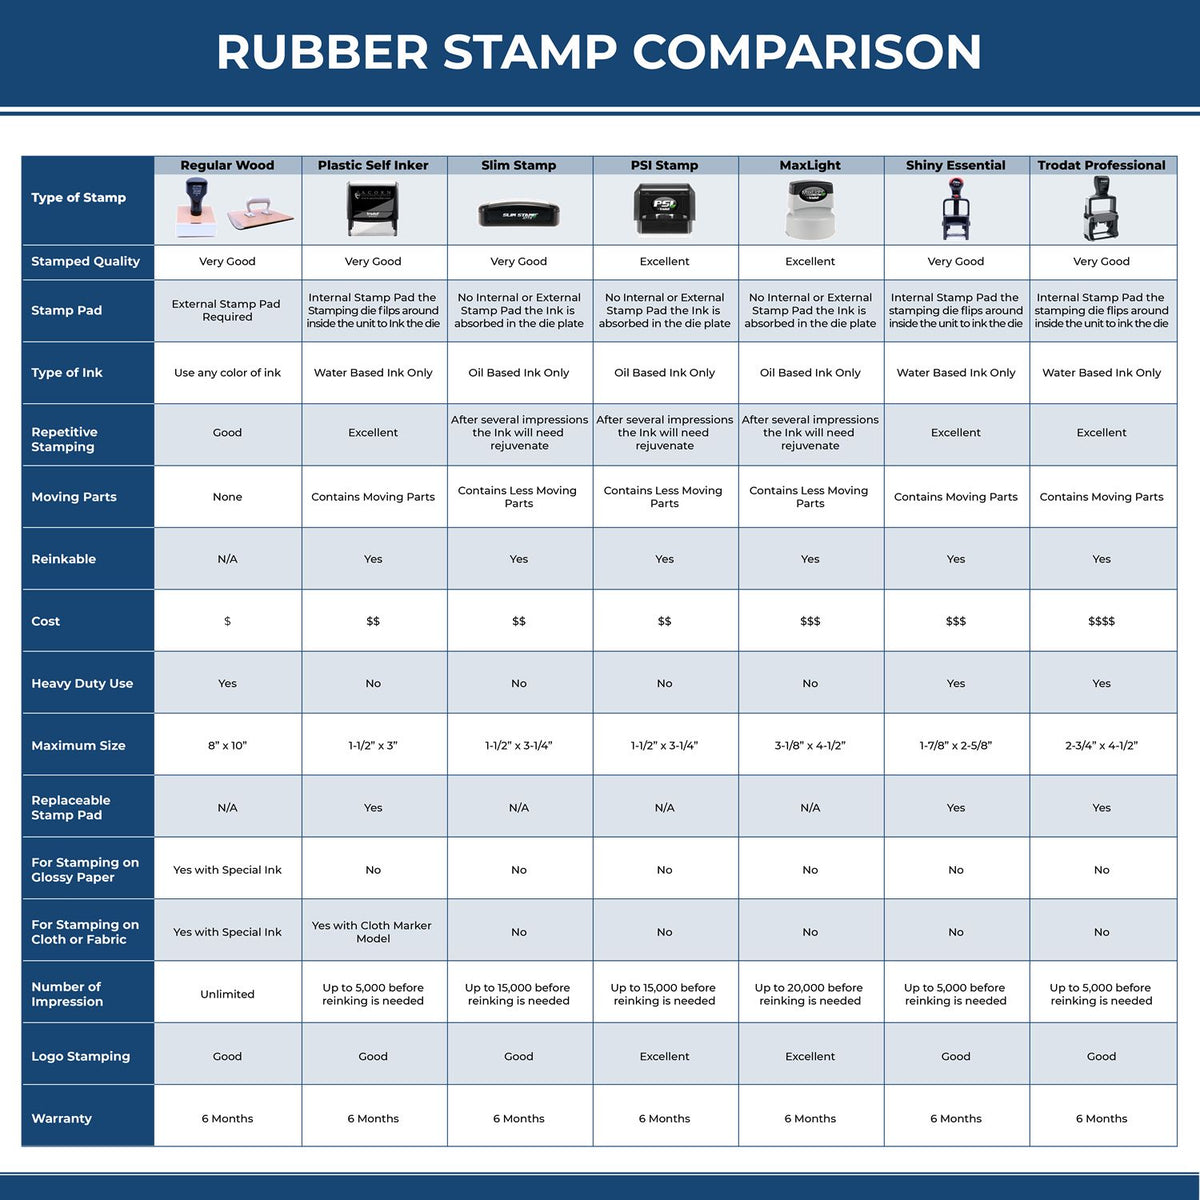 A comparison chart for the different types of mount models available for the Heavy-Duty Delaware Rectangular Notary Stamp.